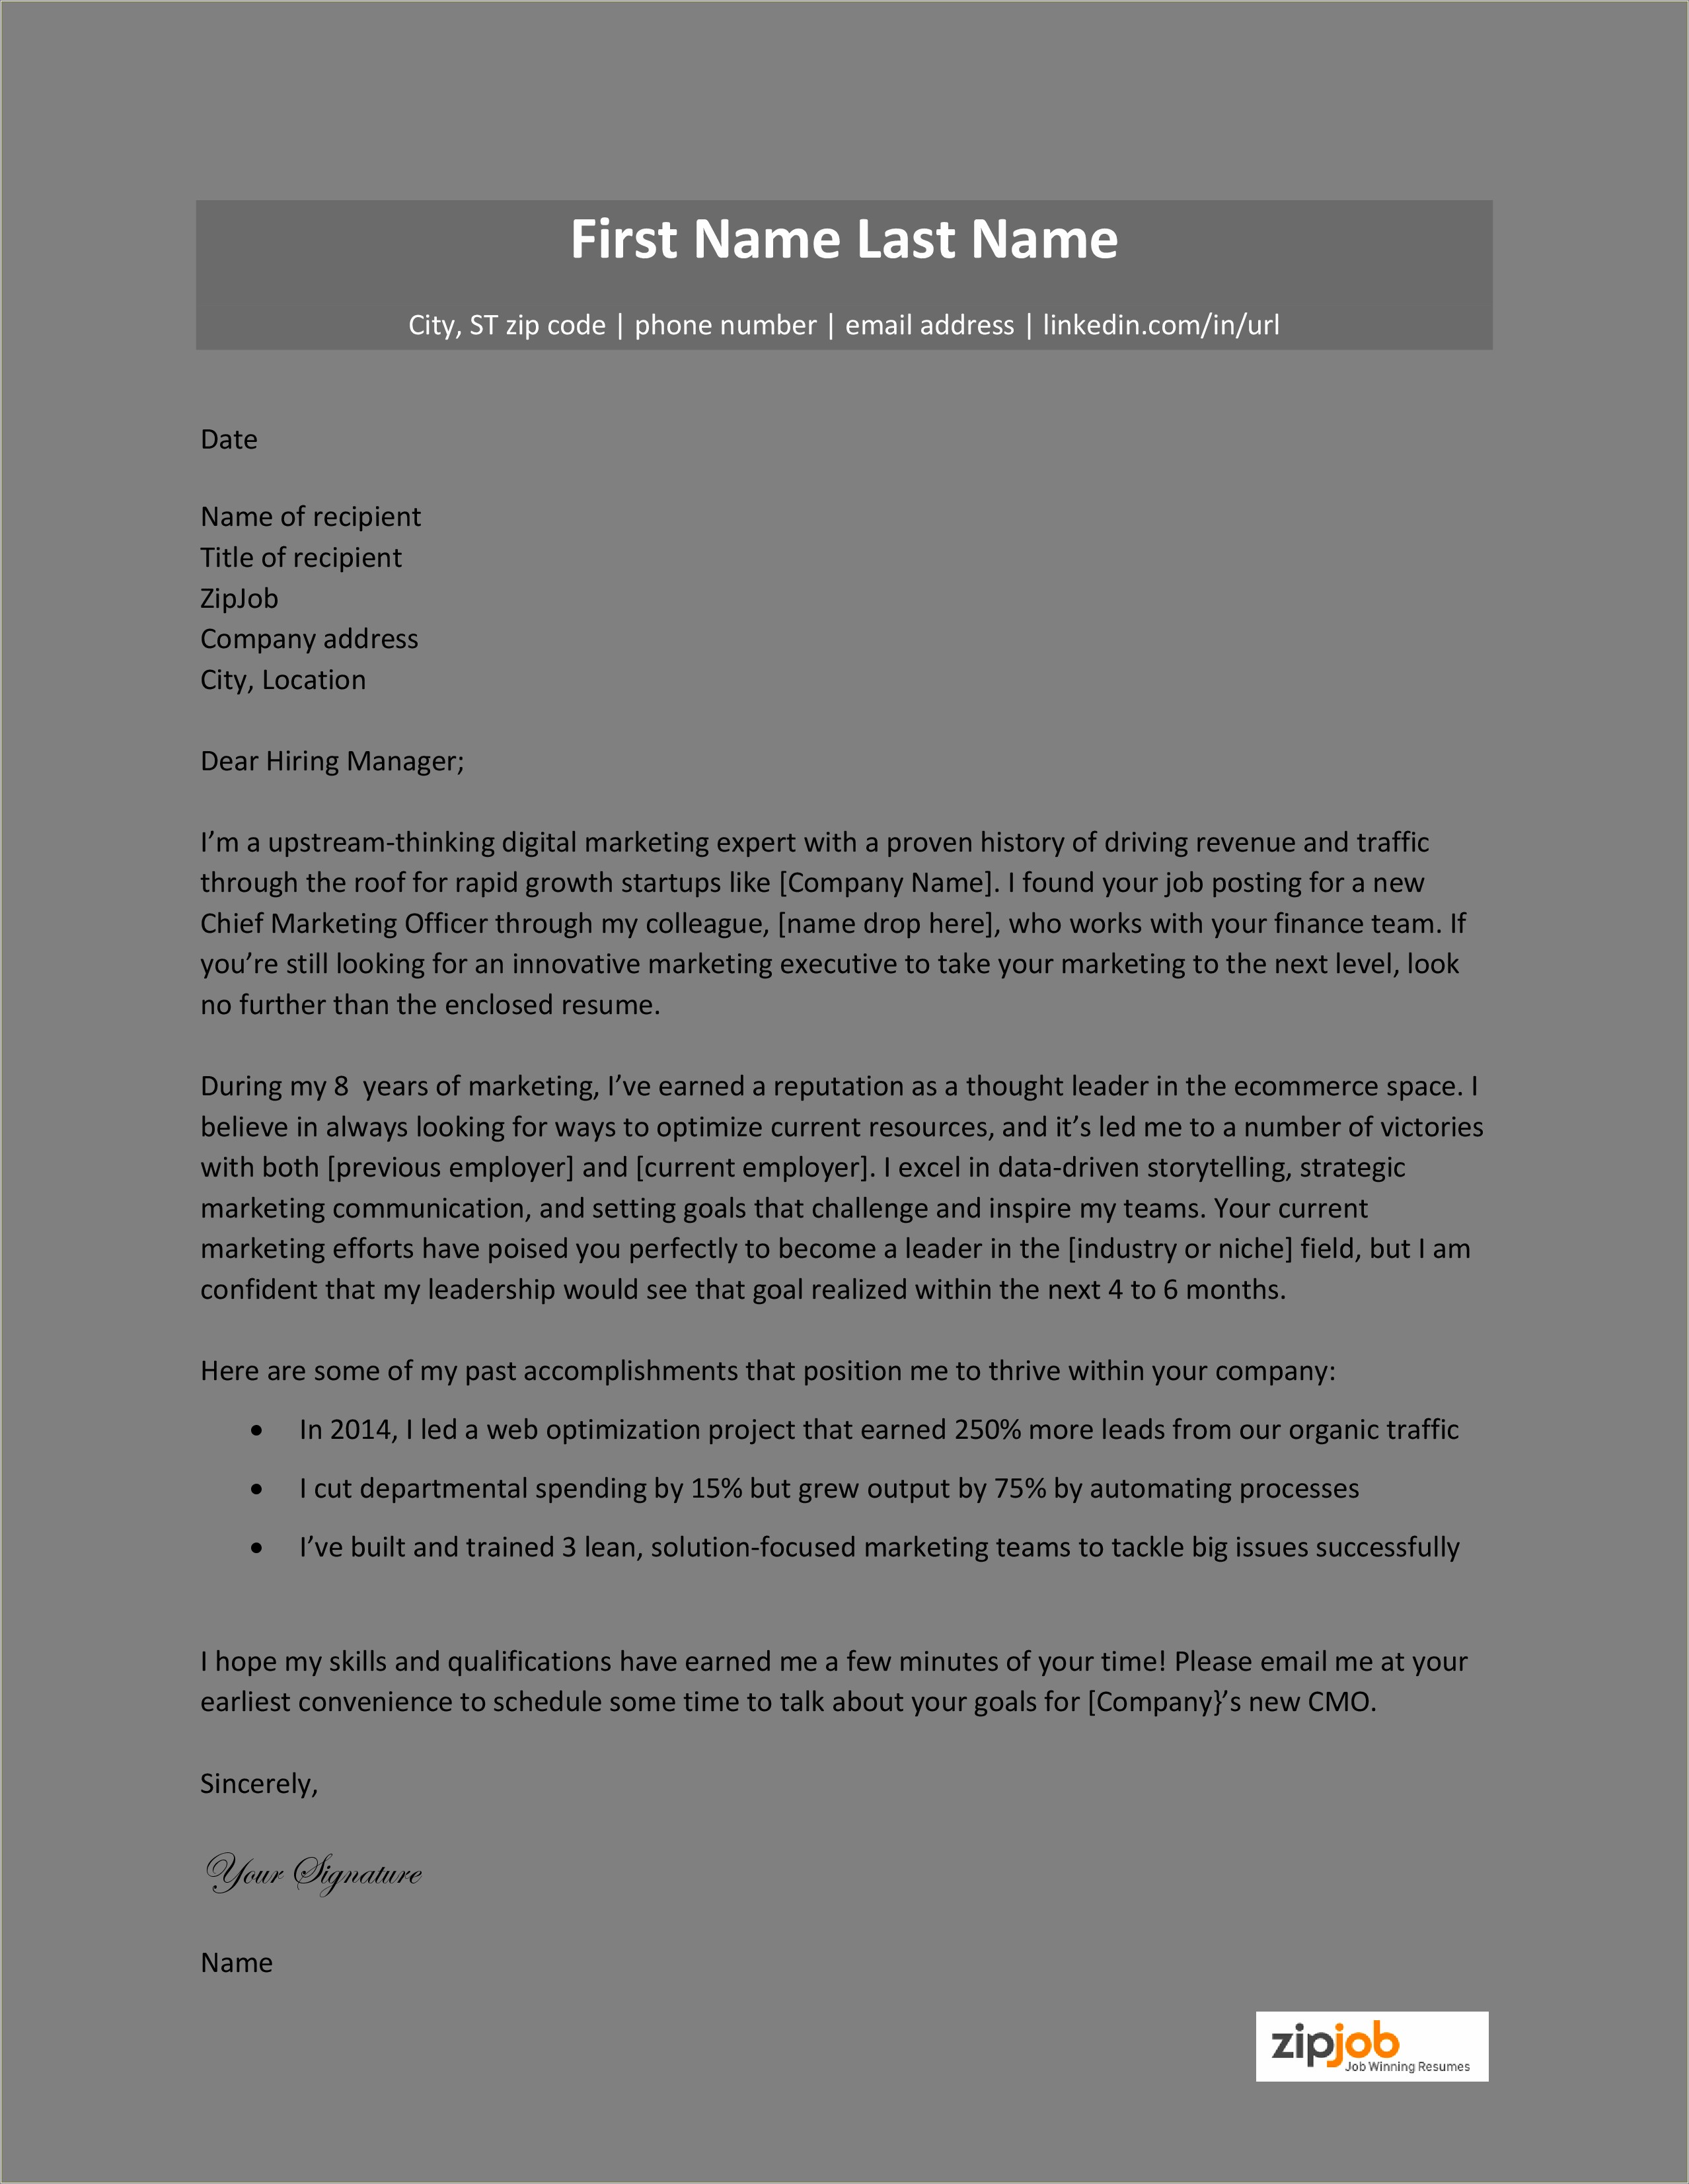 Resume Cover Letter Inurl Cover Letter